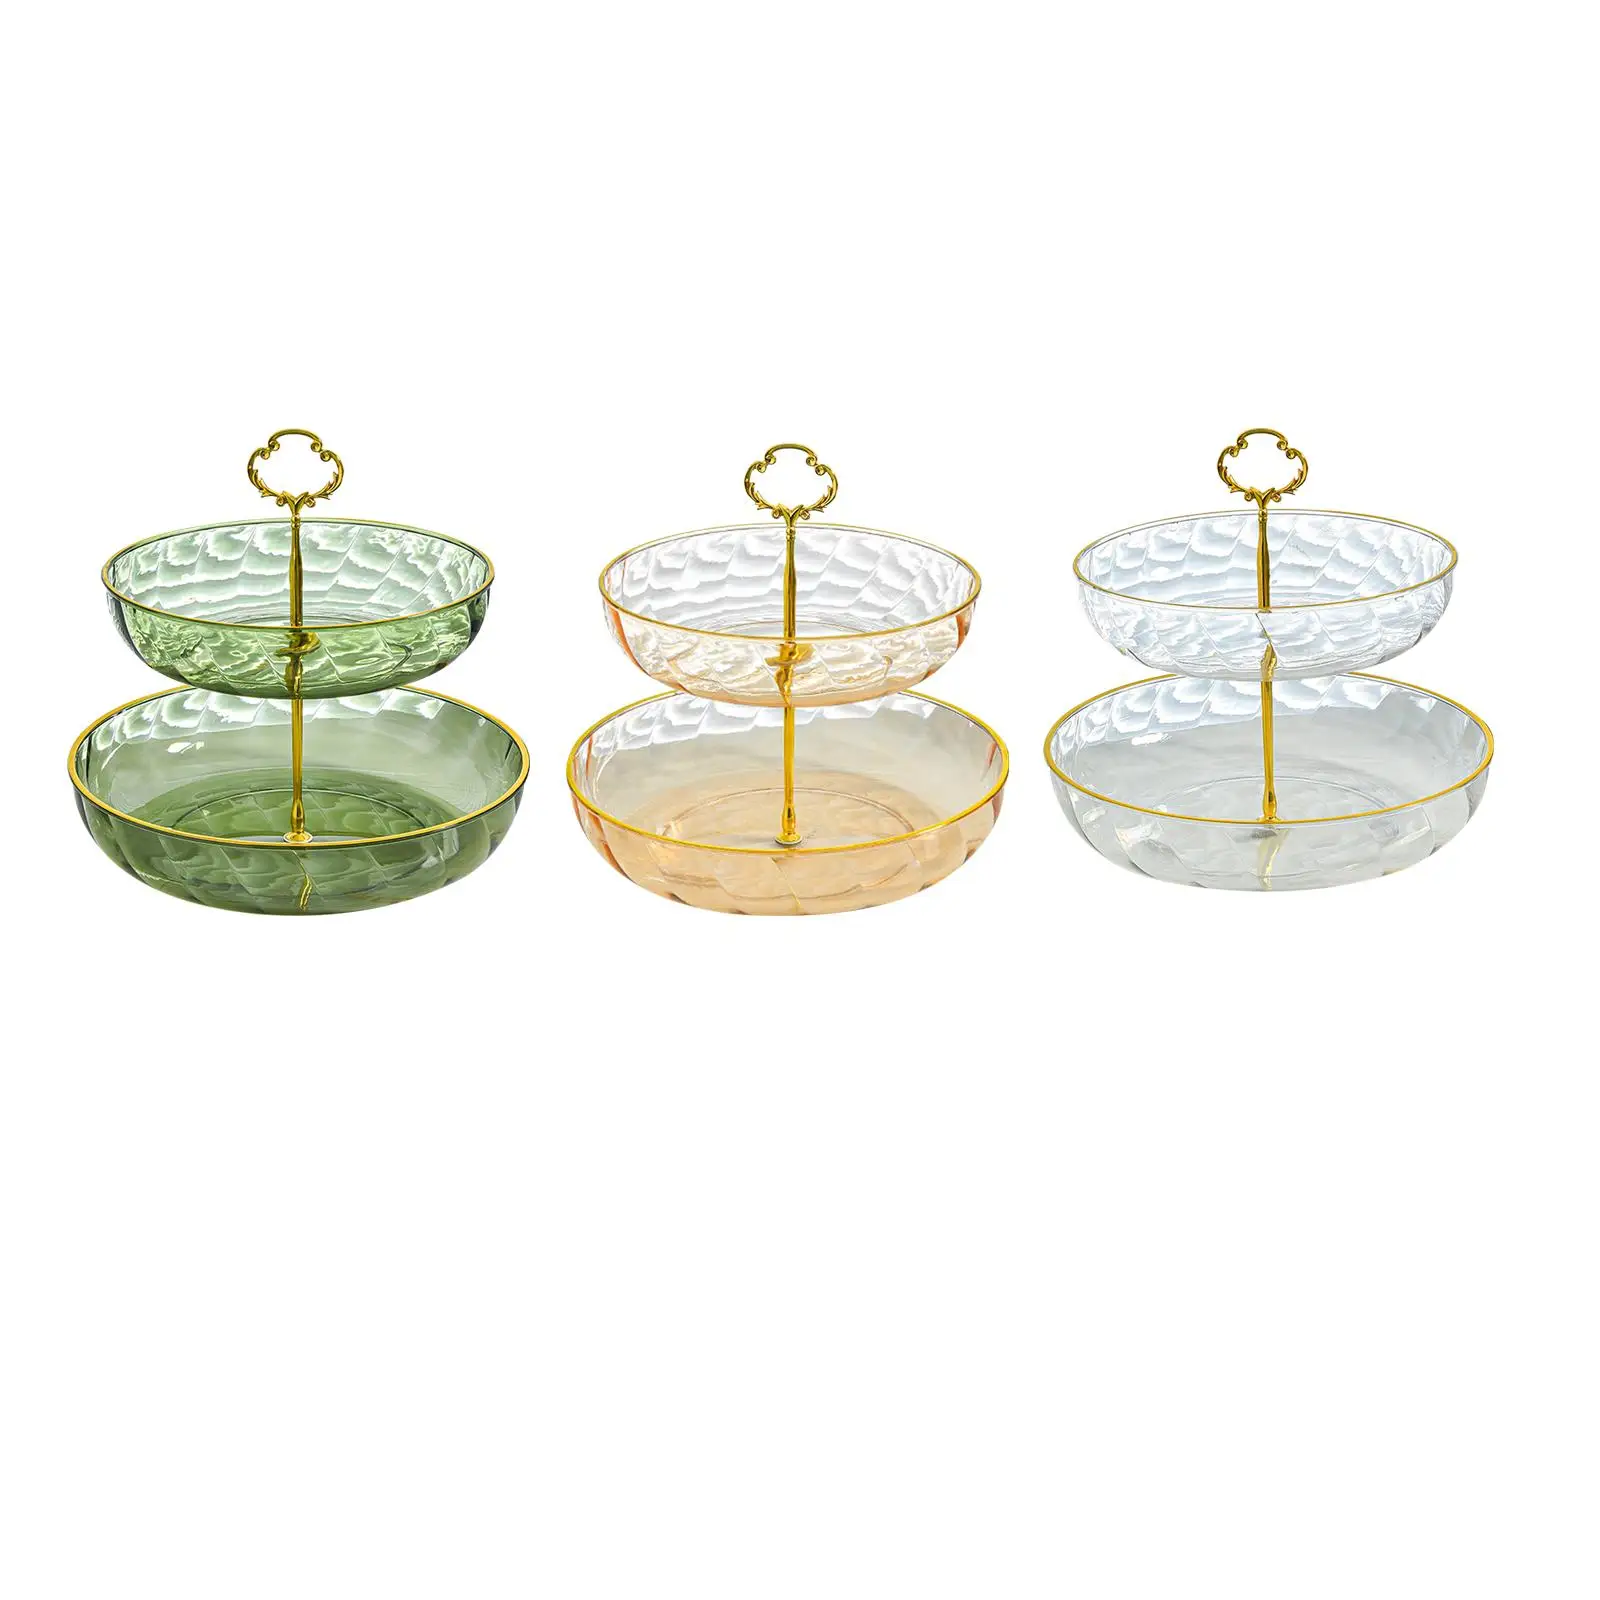 Cake Stand 2 Tier Table Pastry Holder for Home Decor Kitchen Dining Room